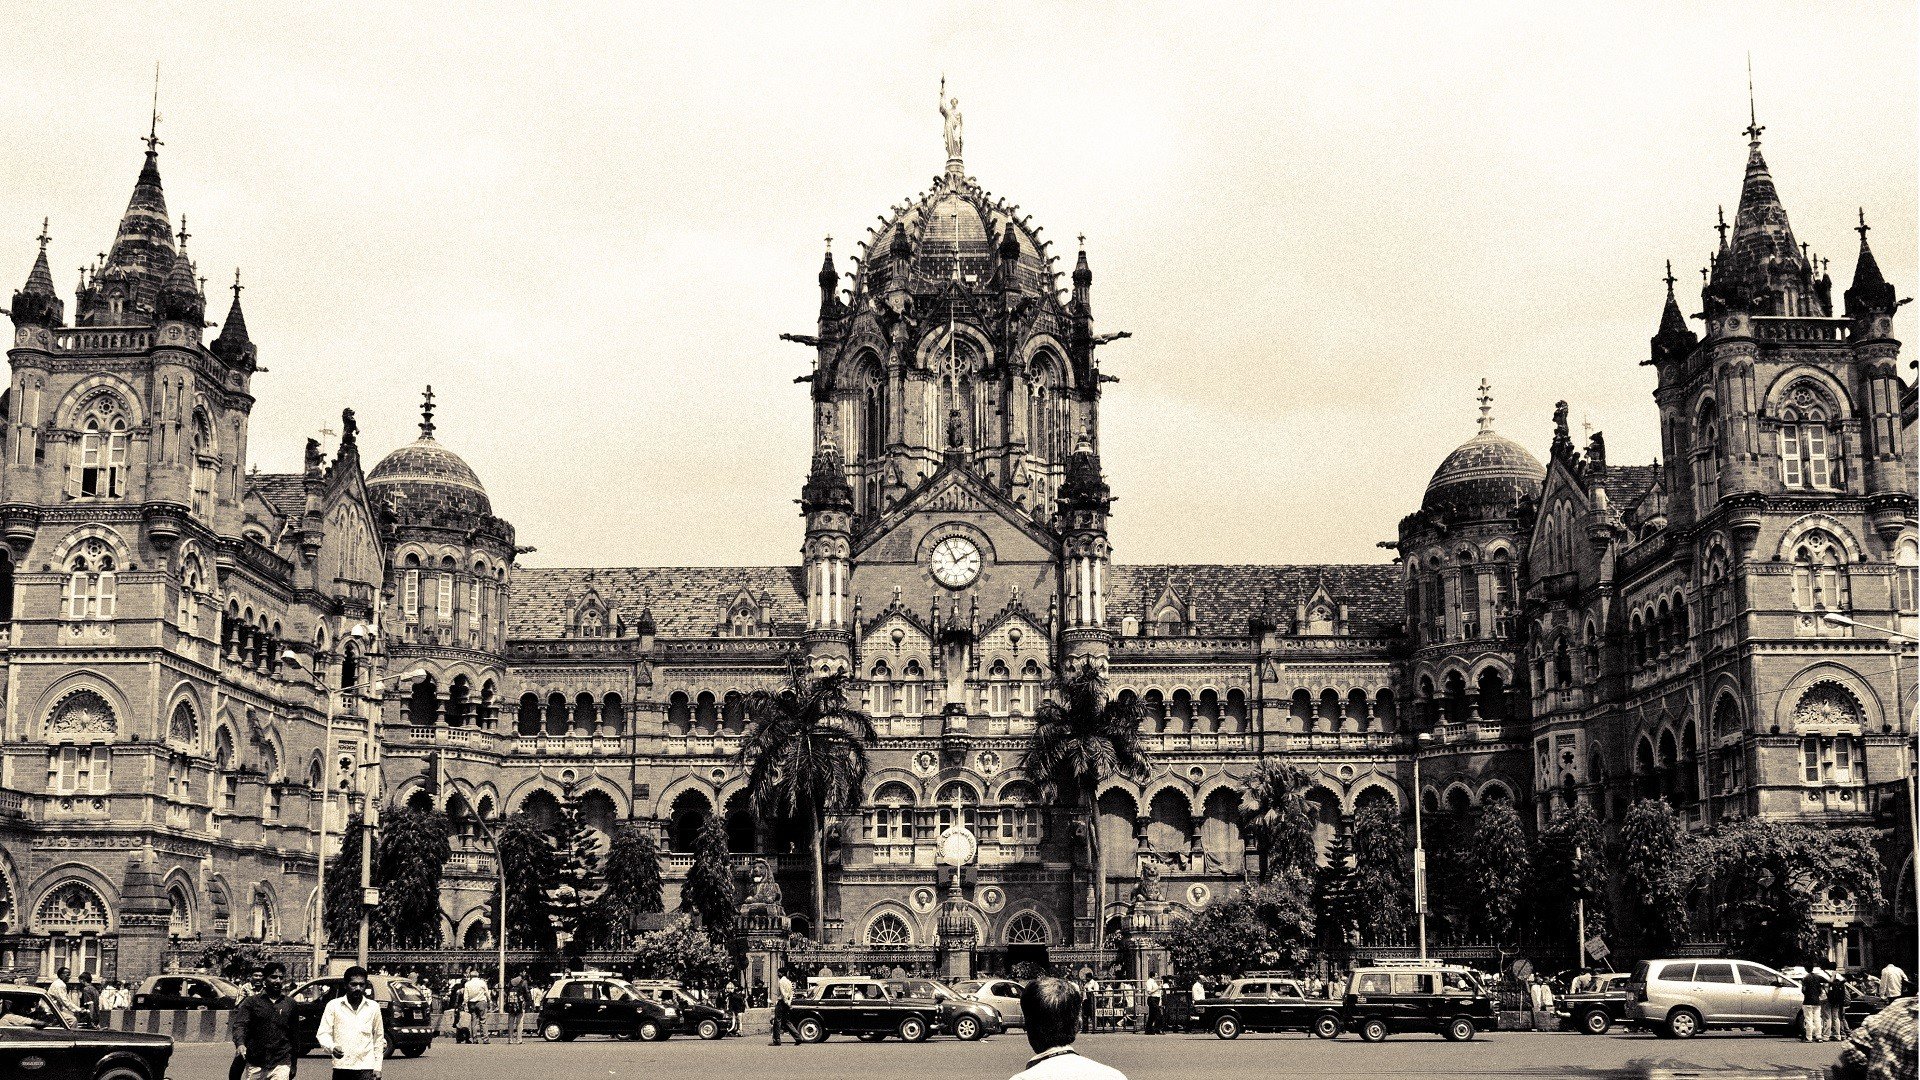 cars, Architecture, Buildings, Crowd, Train, Stations, Grayscale, Mumbai, Aia Wallpaper